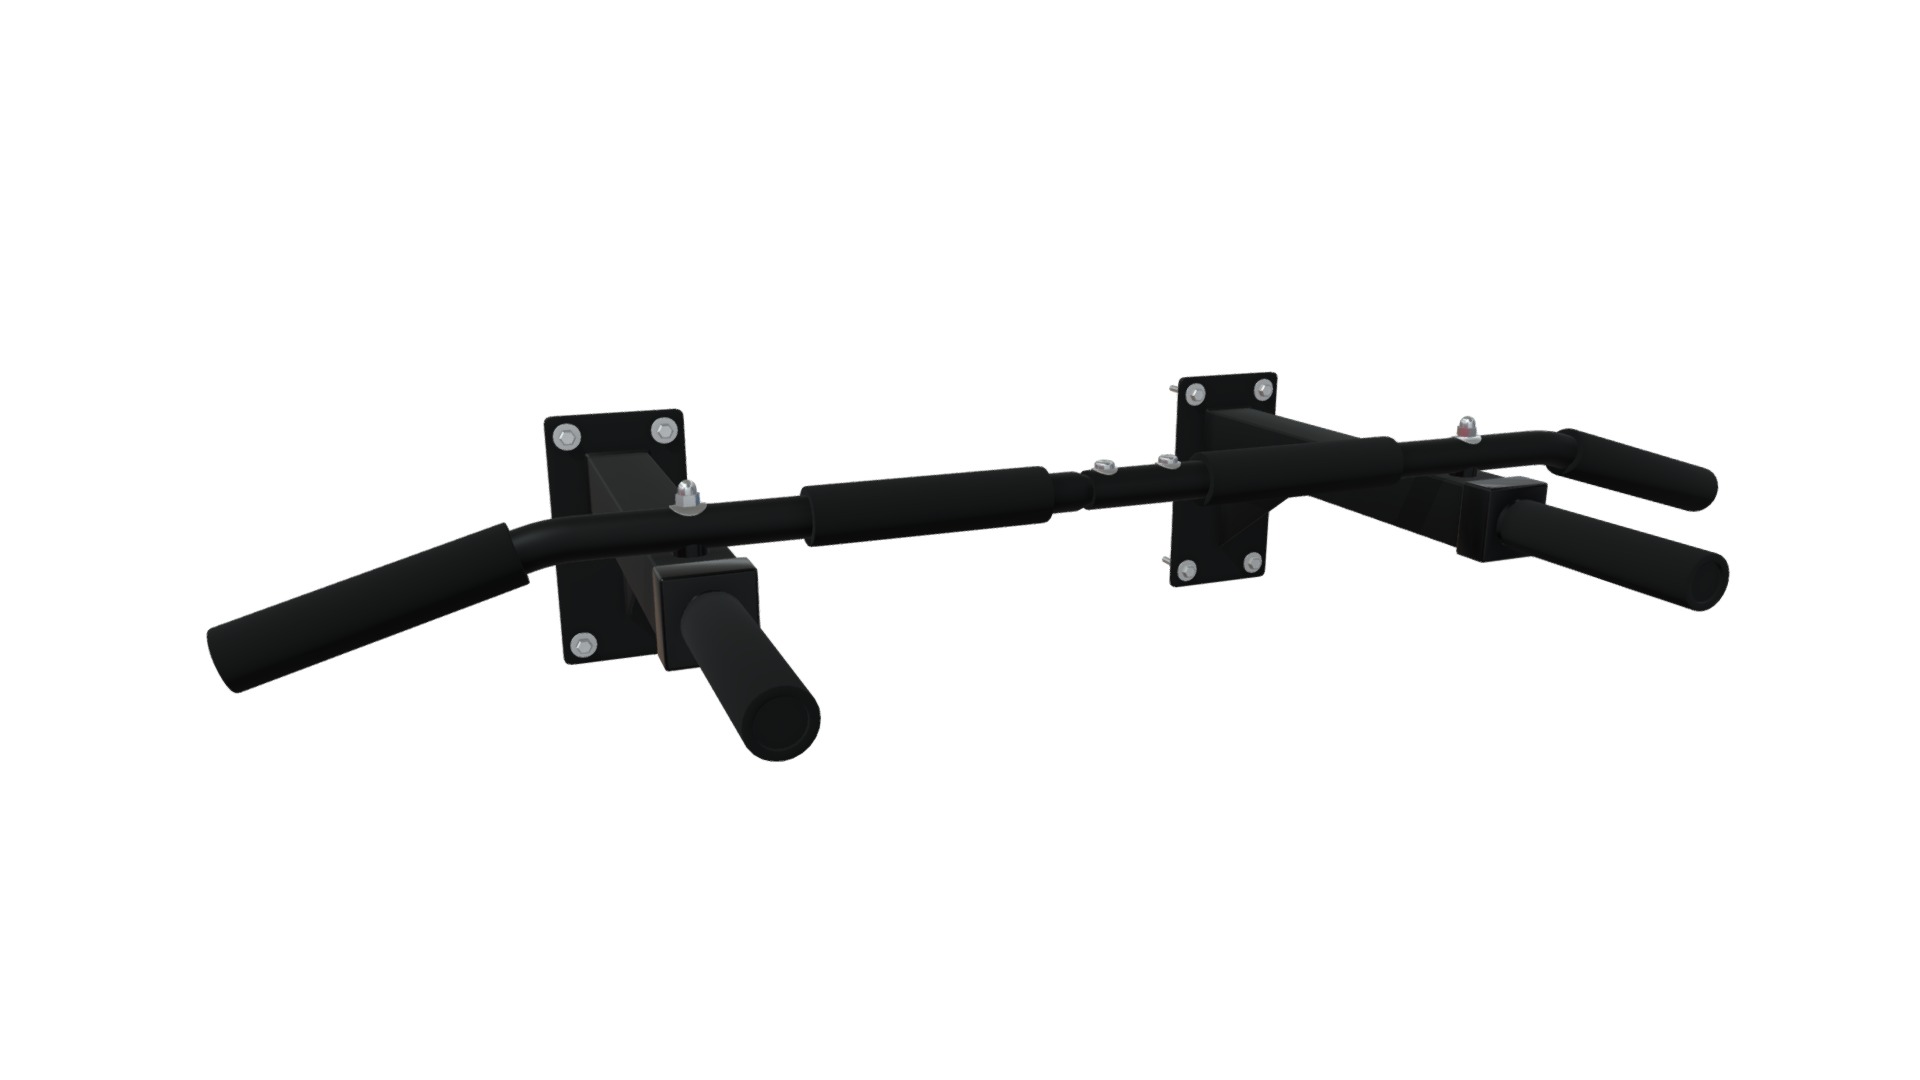 3D model Wall Mounted Pull Up Bar - This is a 3D model of the Wall Mounted Pull Up Bar. The 3D model is about a black and silver rifle.